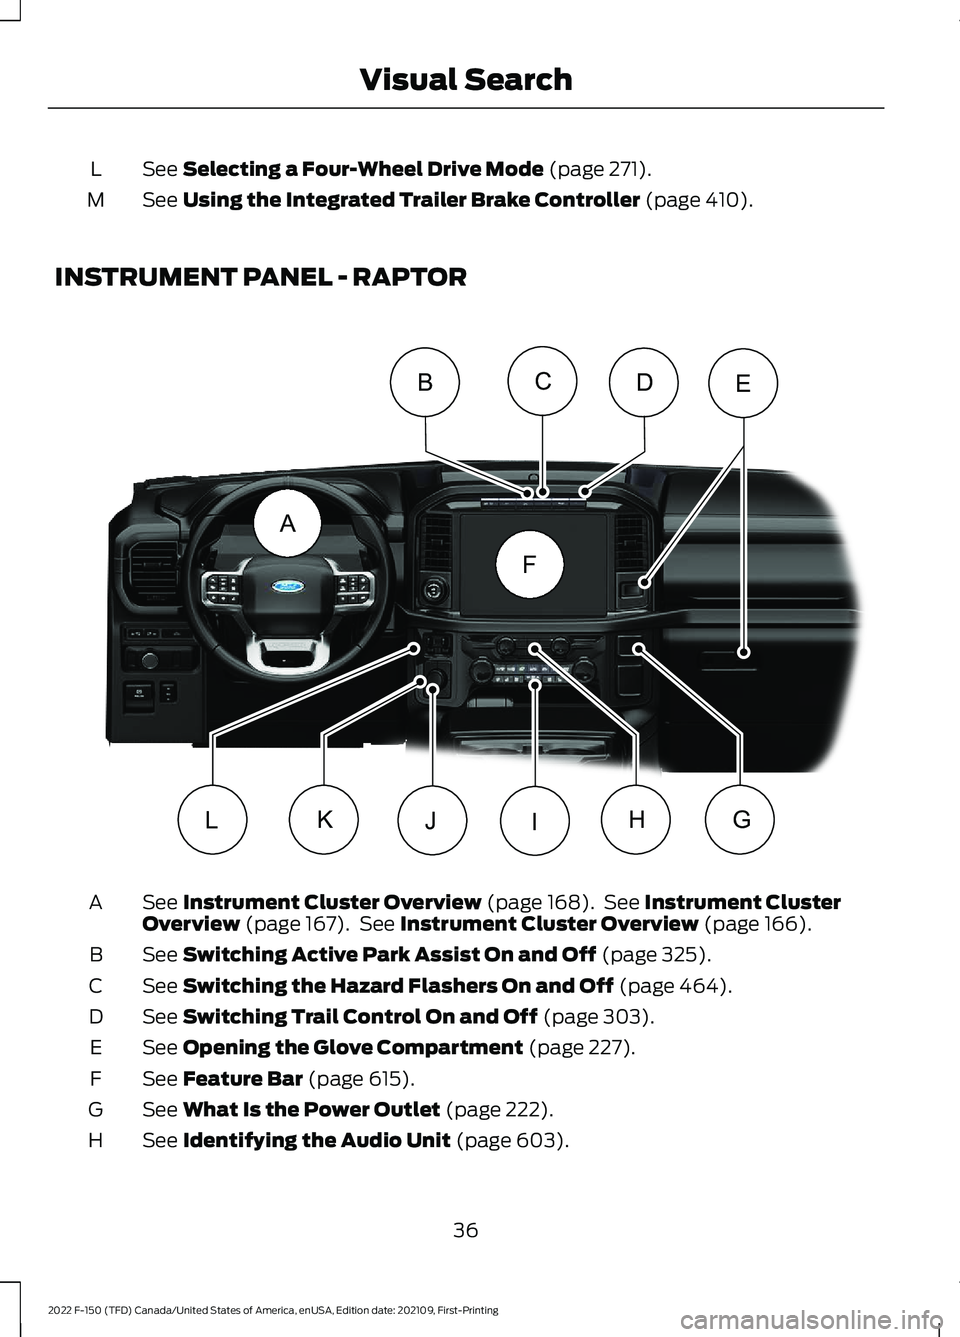 FORD F-150 2022 Owners Guide See Selecting a Four-Wheel Drive Mode (page 271).
L
See 
Using the Integrated Trailer Brake Controller (page 410).
M
INSTRUMENT PANEL - RAPTOR See 
Instrument Cluster Overview (page 168).  See Instrum